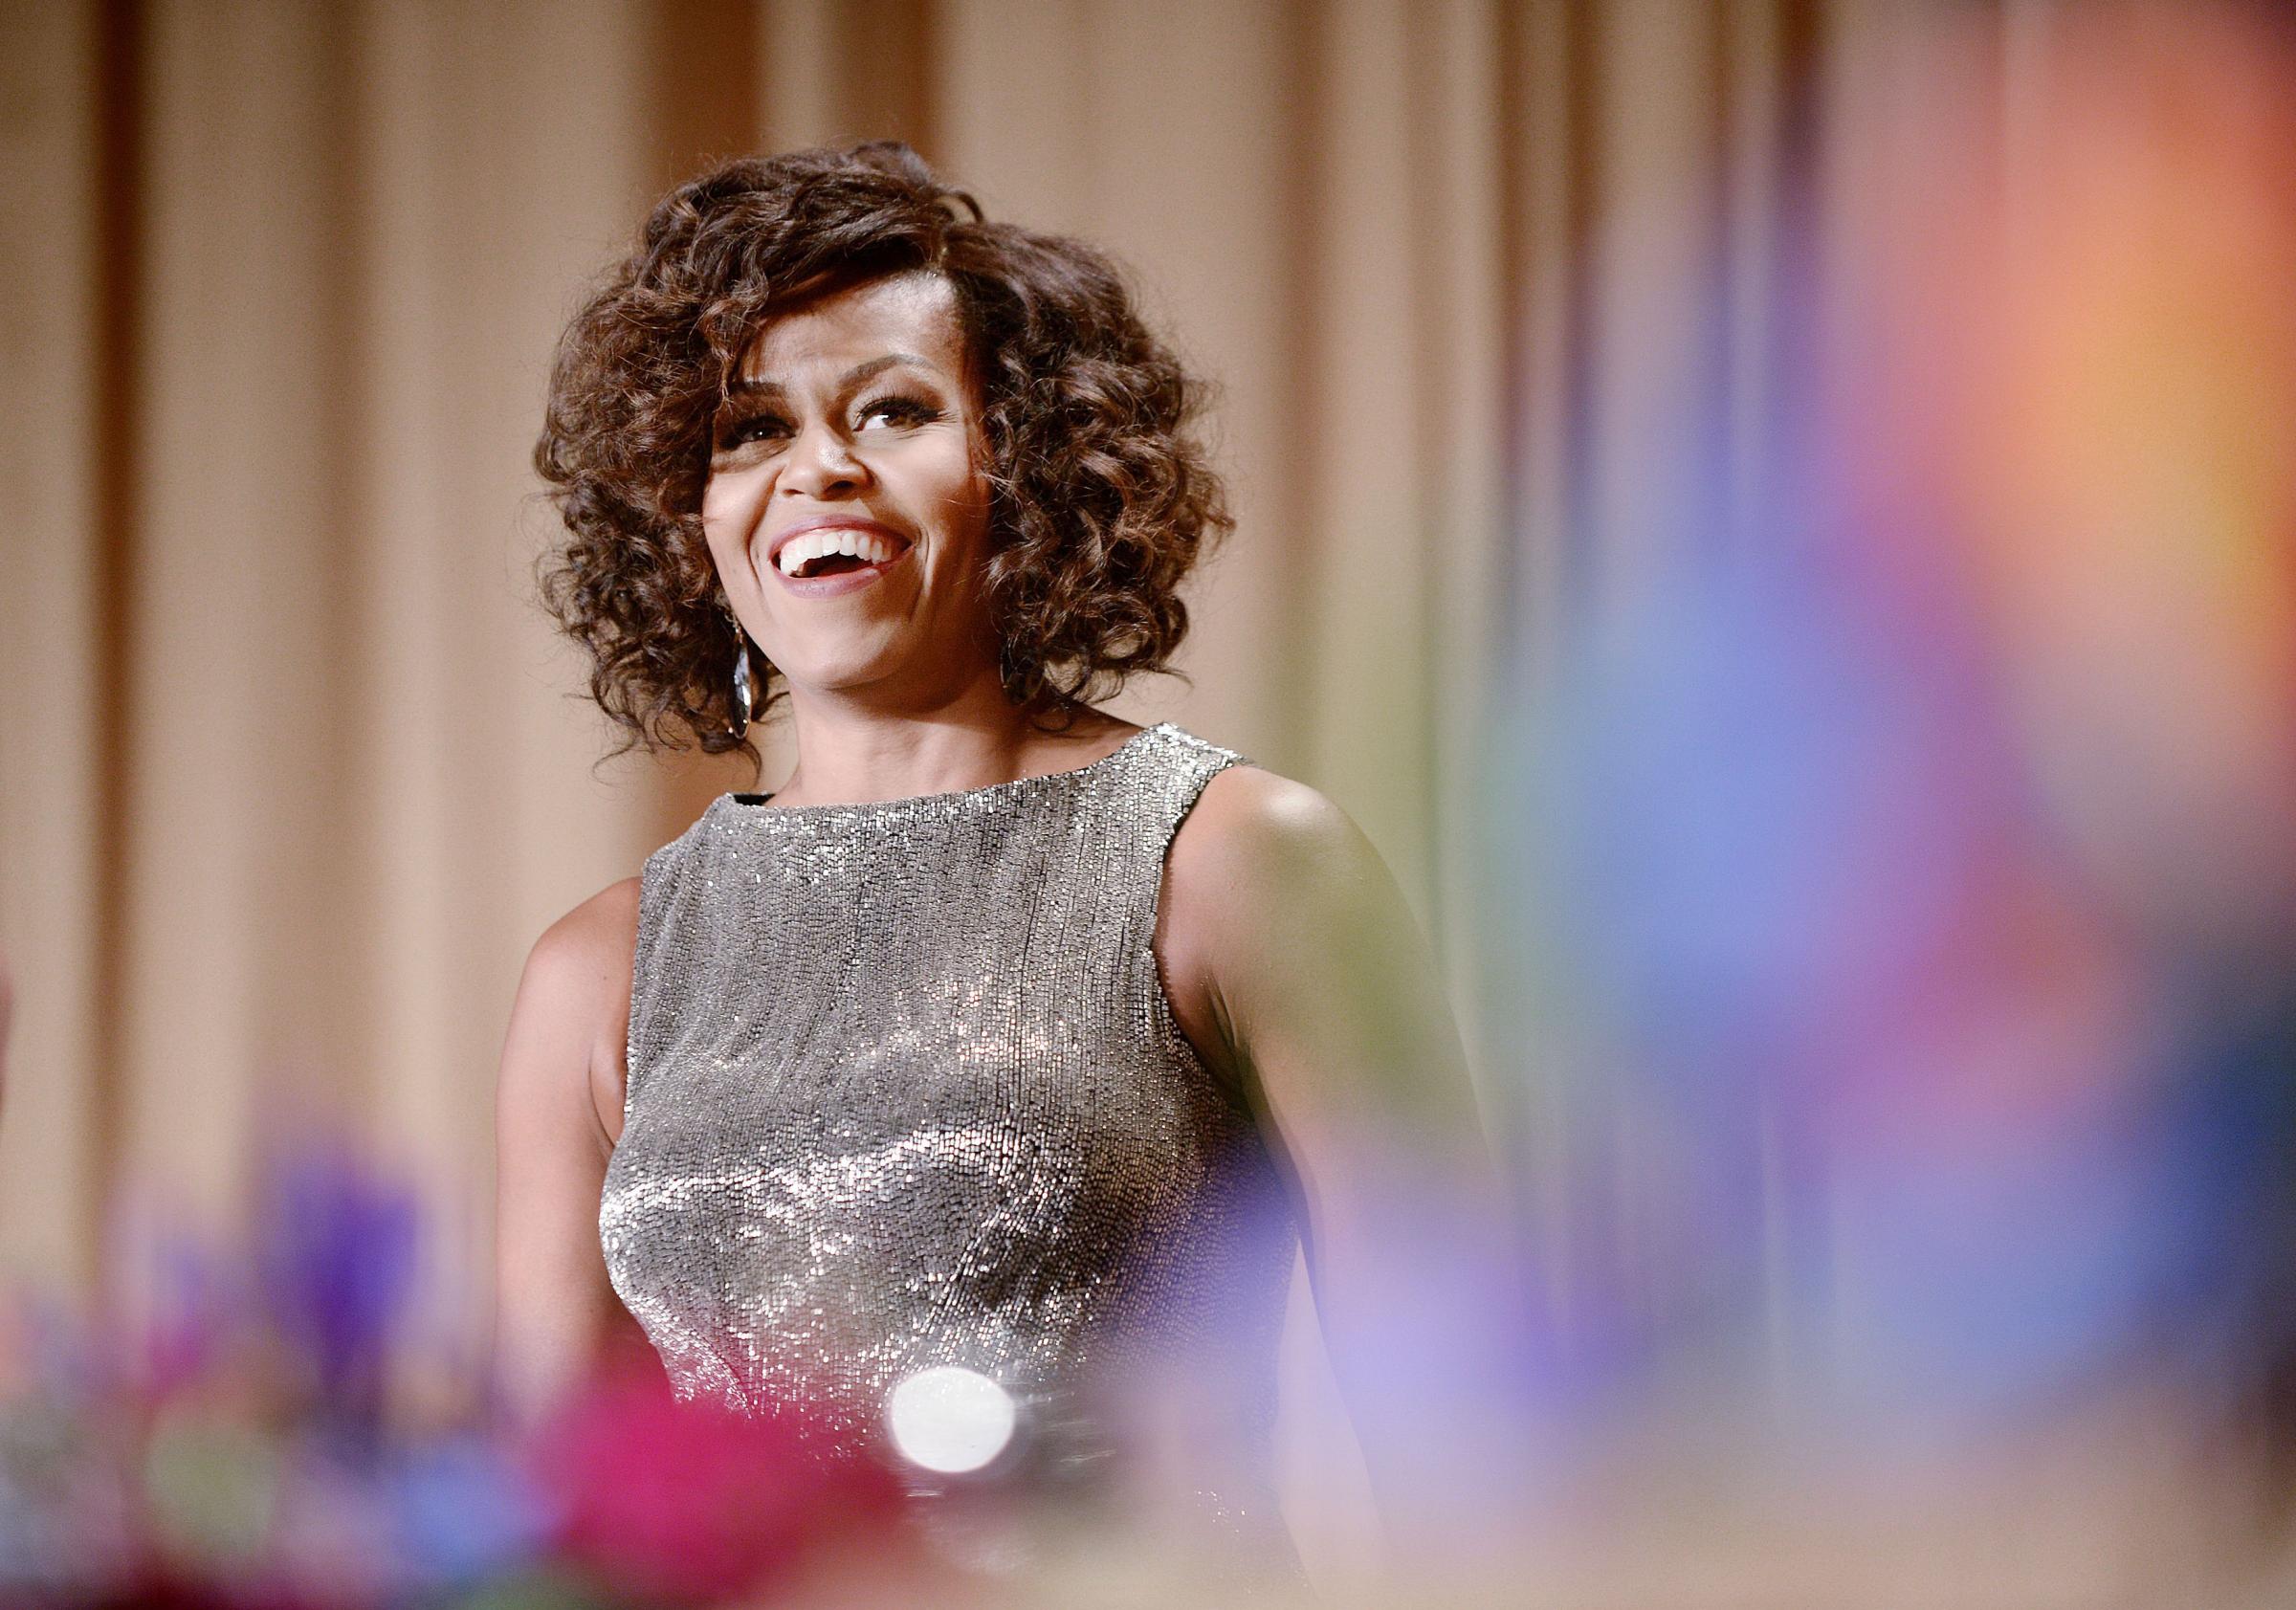 WASHINGTON, DC - APRIL 25: First Lady Michelle Obama attends the annual White House Correspondent's Association Gala at the Washington Hilton hotel April 25, 2015 in Washington, D.C. The dinner is an annual event attended by journalists, politicians and celebrities. (Photo by Olivier Douliery-Pool/Getty Images)